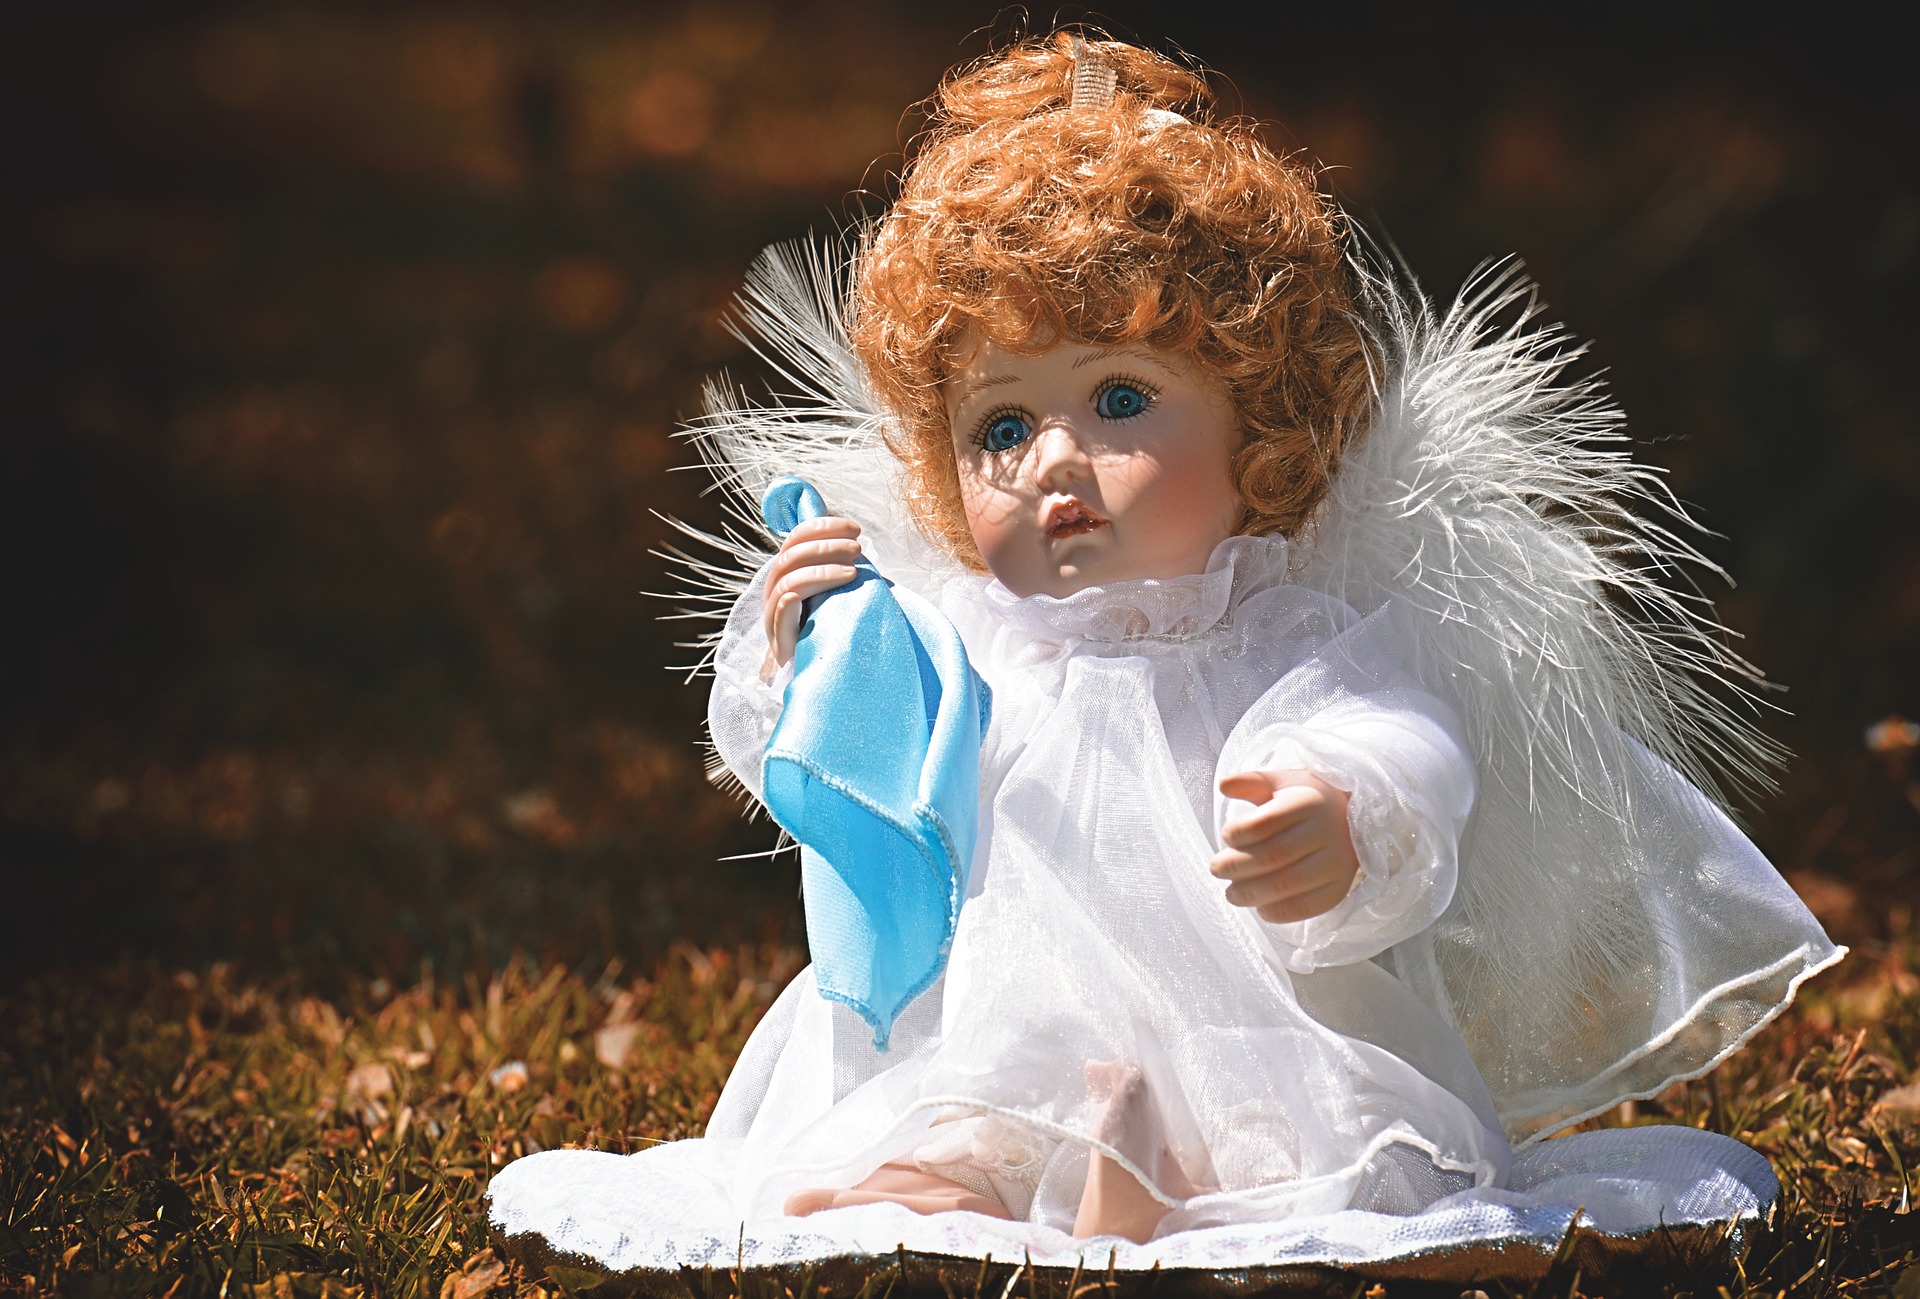 Sad Doll Wallpaper In Resolution - Good Morning Pictures With Angels - HD Wallpaper 